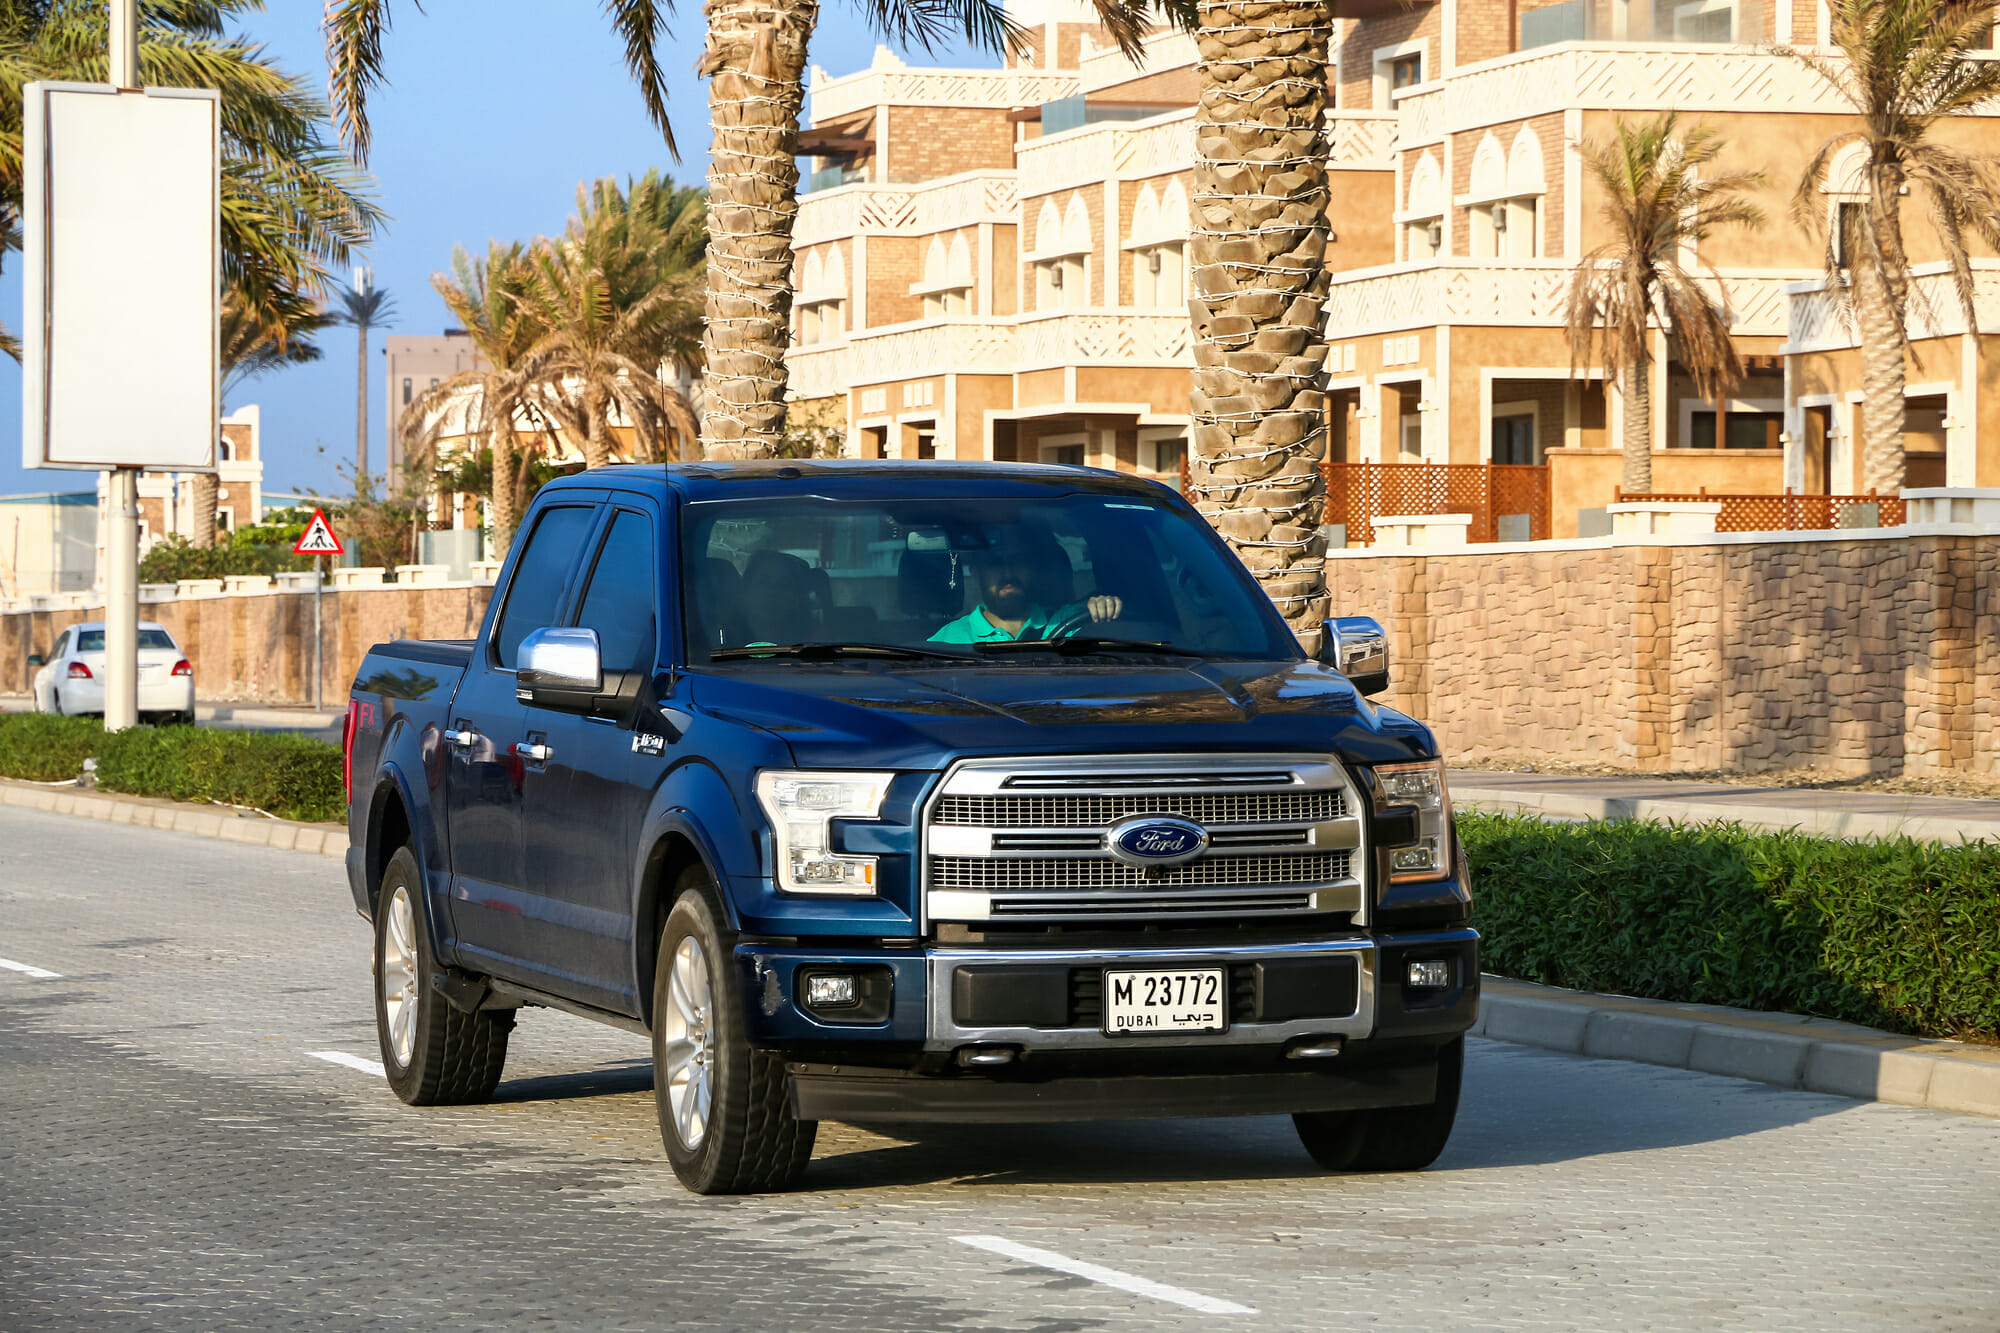 Ford F-150 driving down street with palm trees - Vehicle History